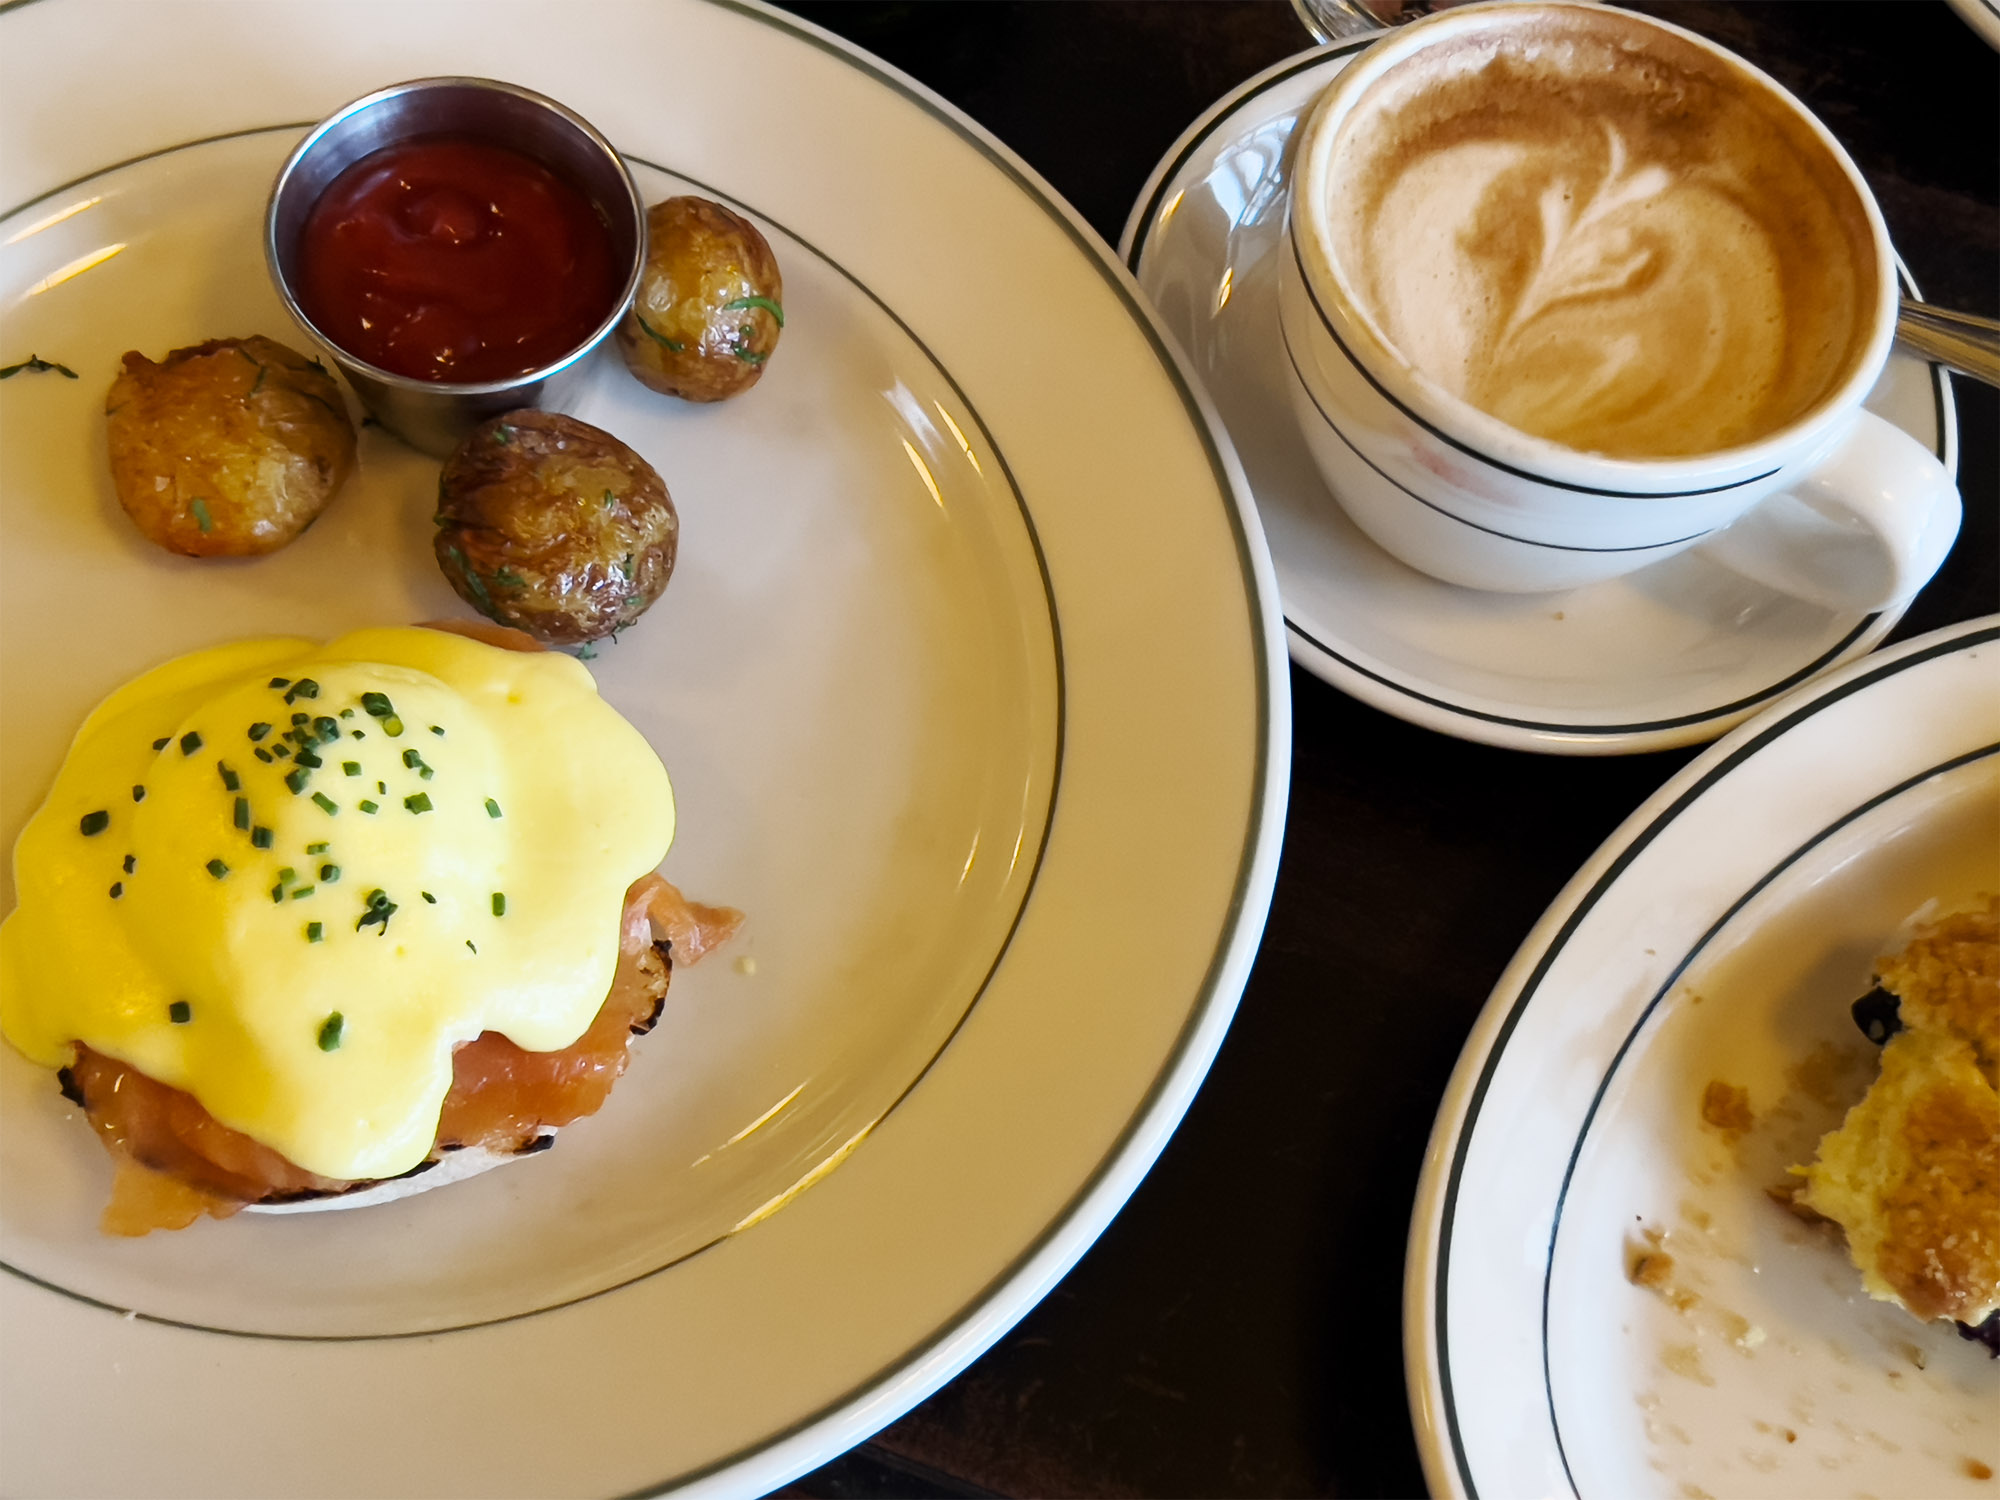 NYC: Breakfast at Pastis